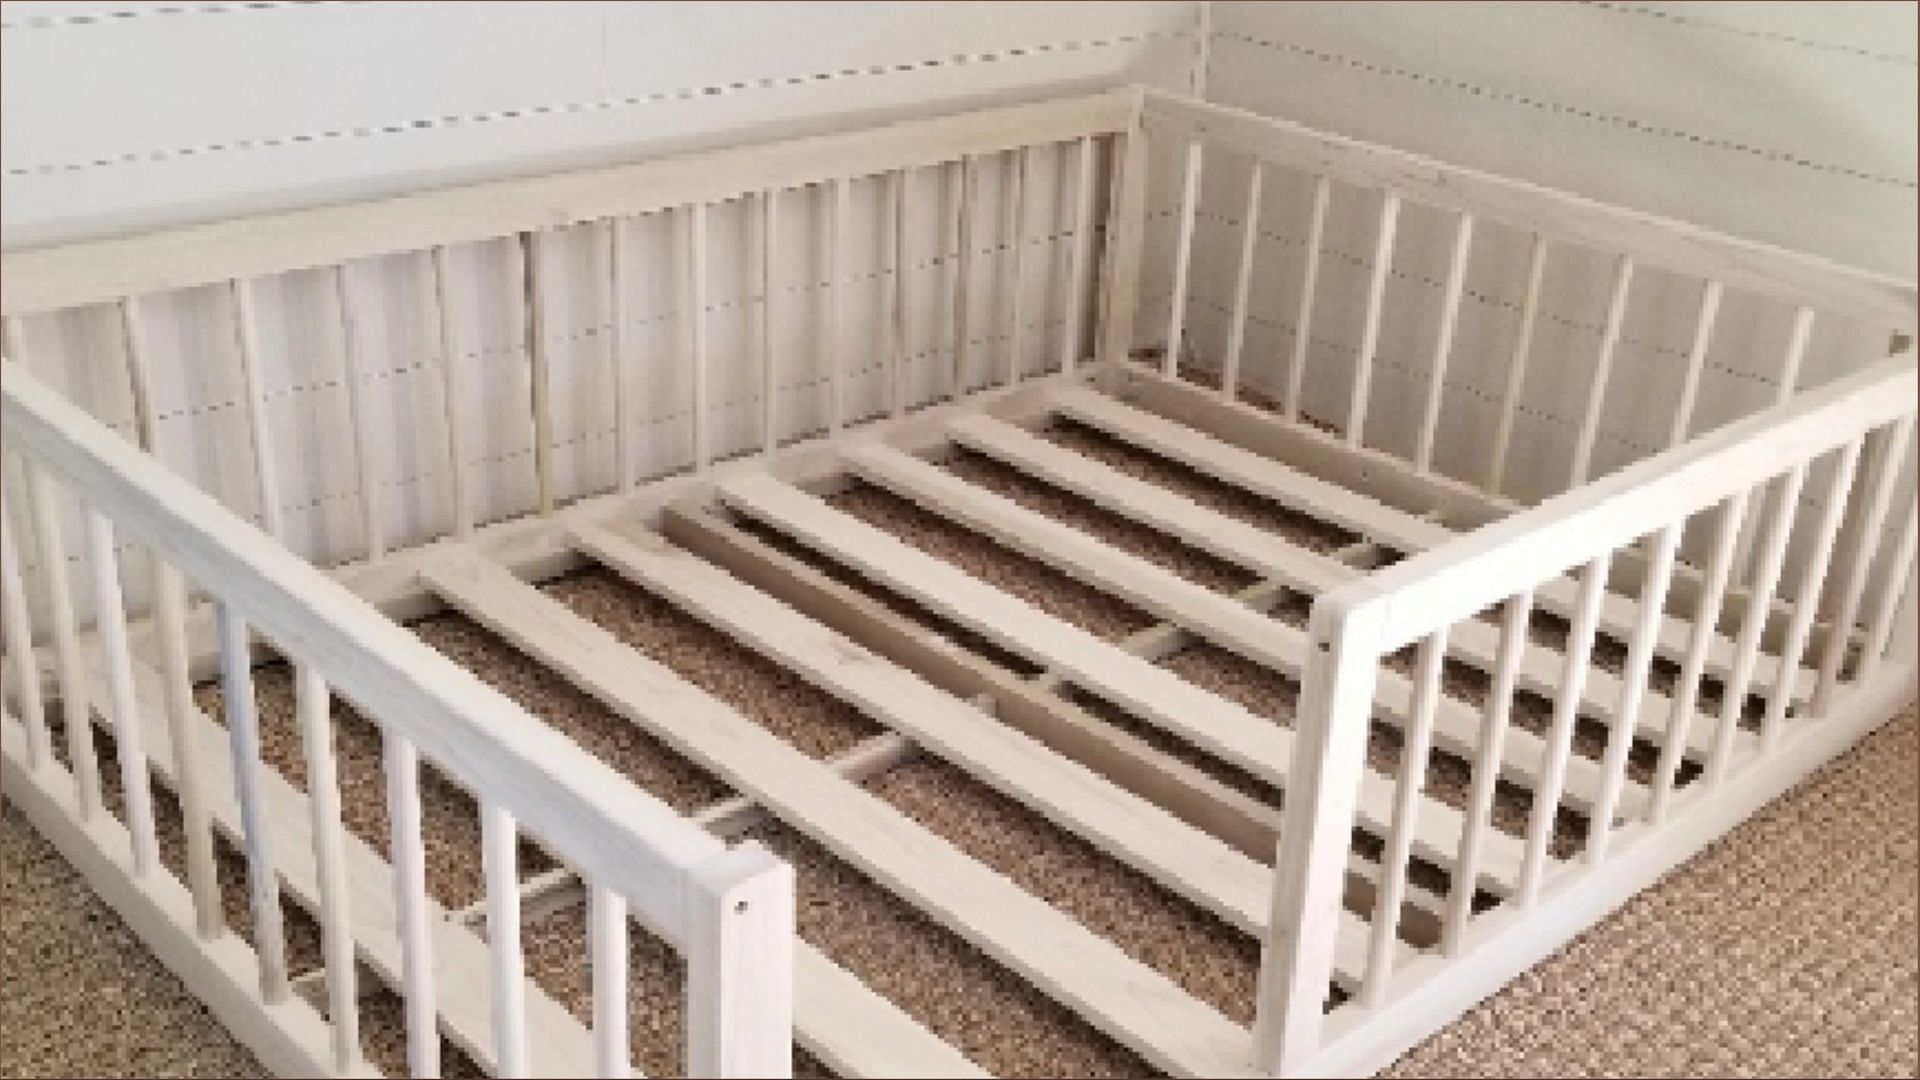 The recalled Zipadee Kids House Bed Frames could put children at risk of entrapment and strangulation (Image via CPSC)